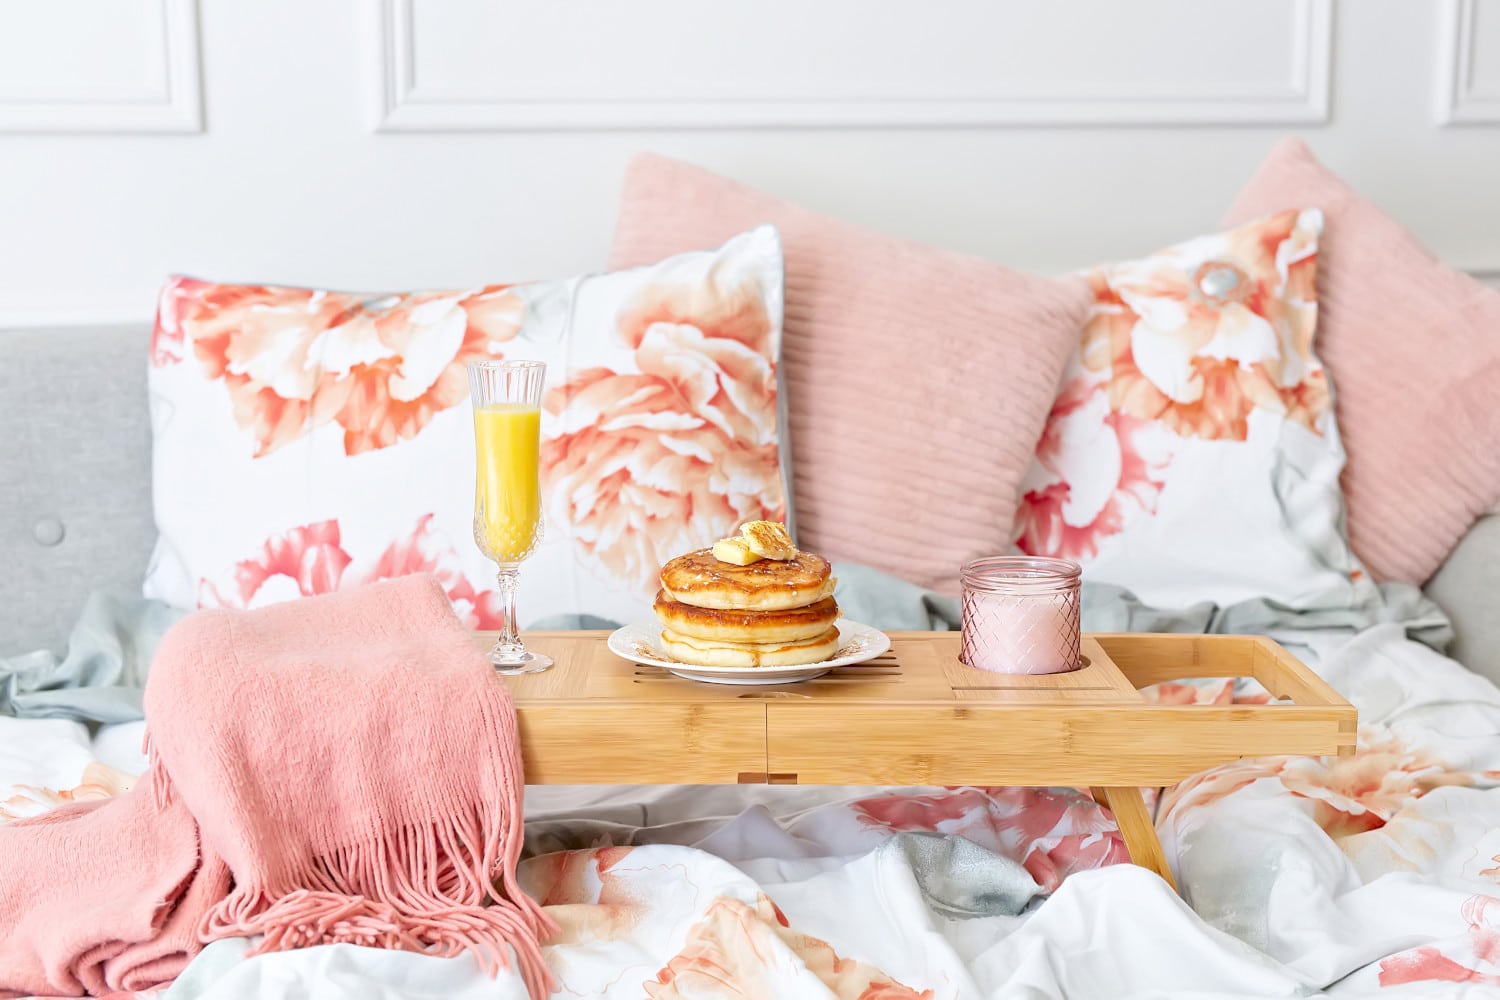 Fancy breakfast in bed with fluffy pancakes, milk and orange juice on a wooden tray